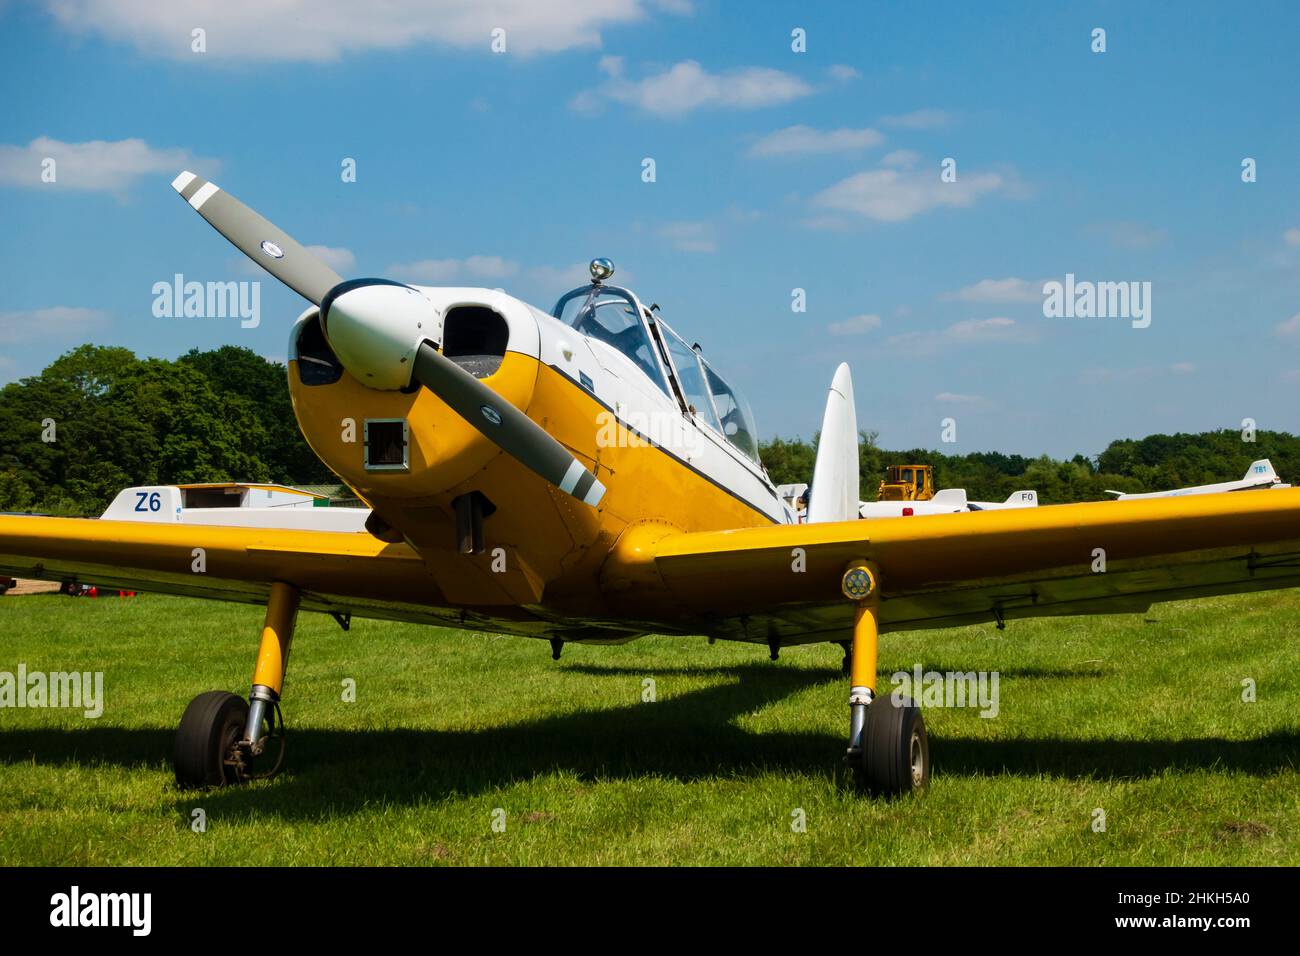 Yellow and white De Havilland Chipmunk with Lycoming engine, now a Supermunk. At Husbands Bosworth airfield, home of the Gliding Center. Stock Photo